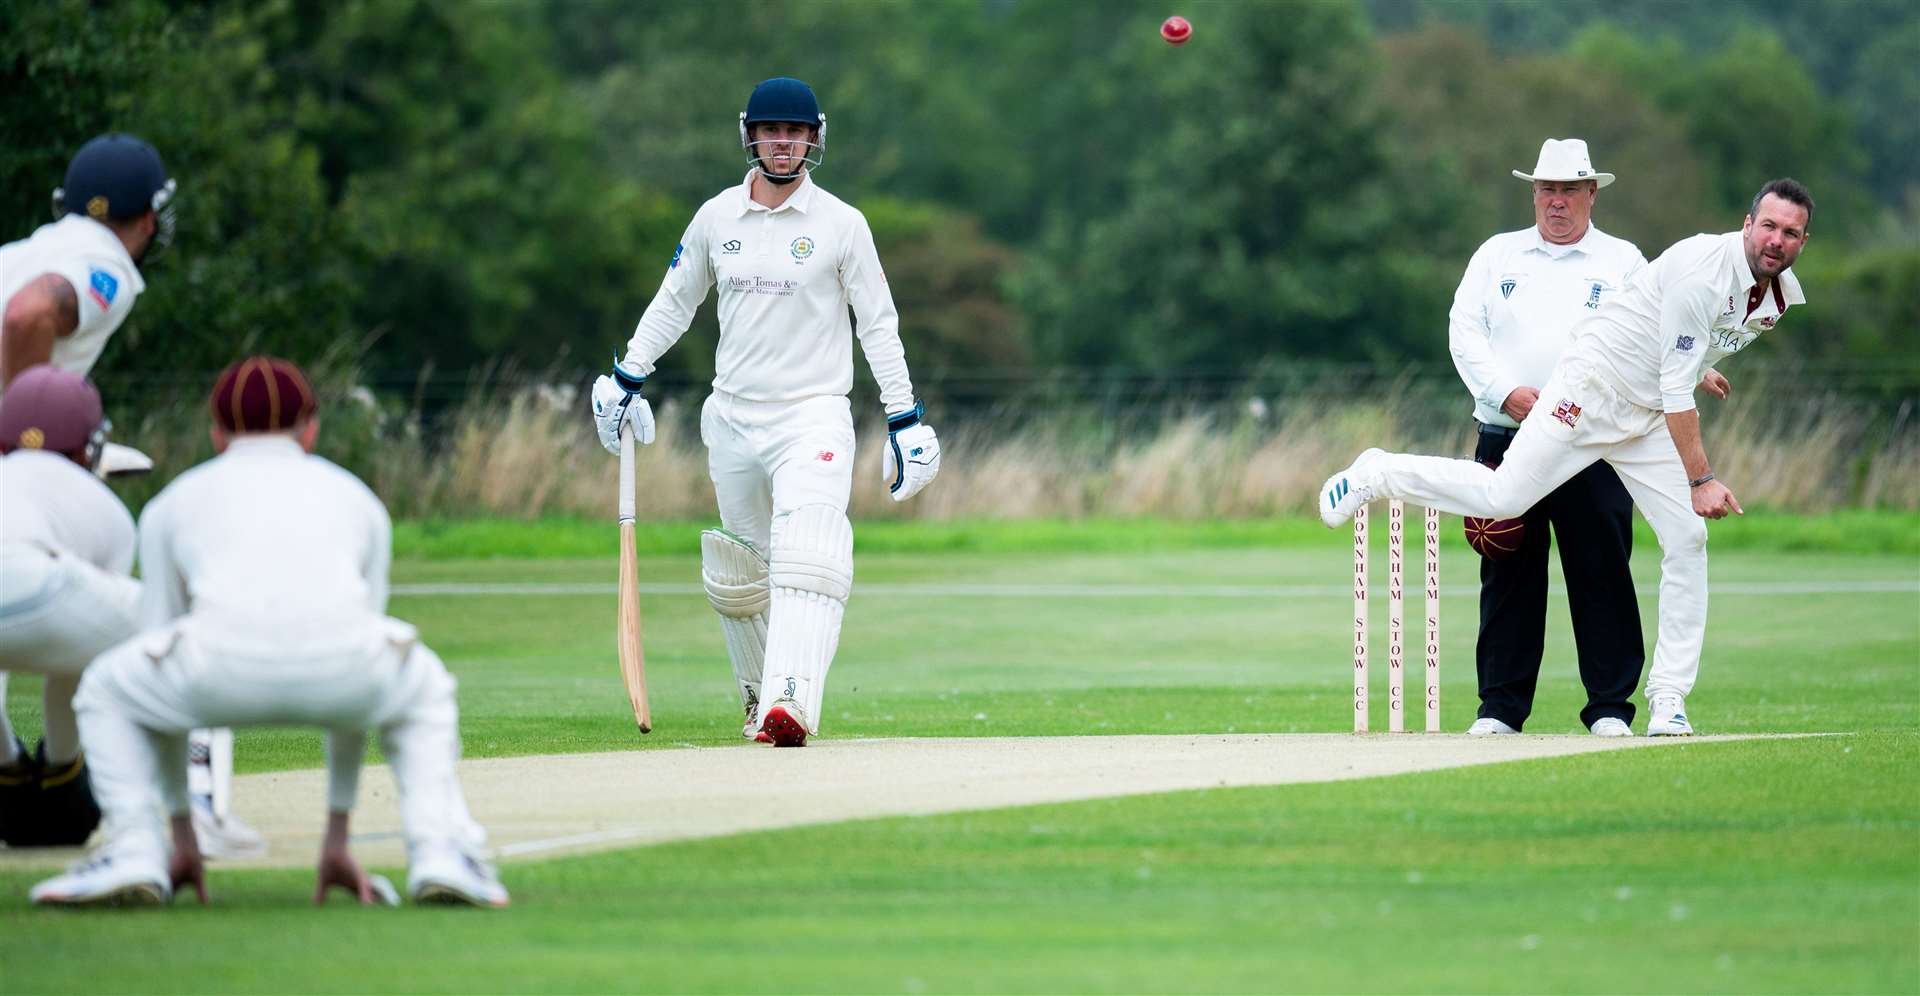 Action from Downham Stow’s victory over North Runcton